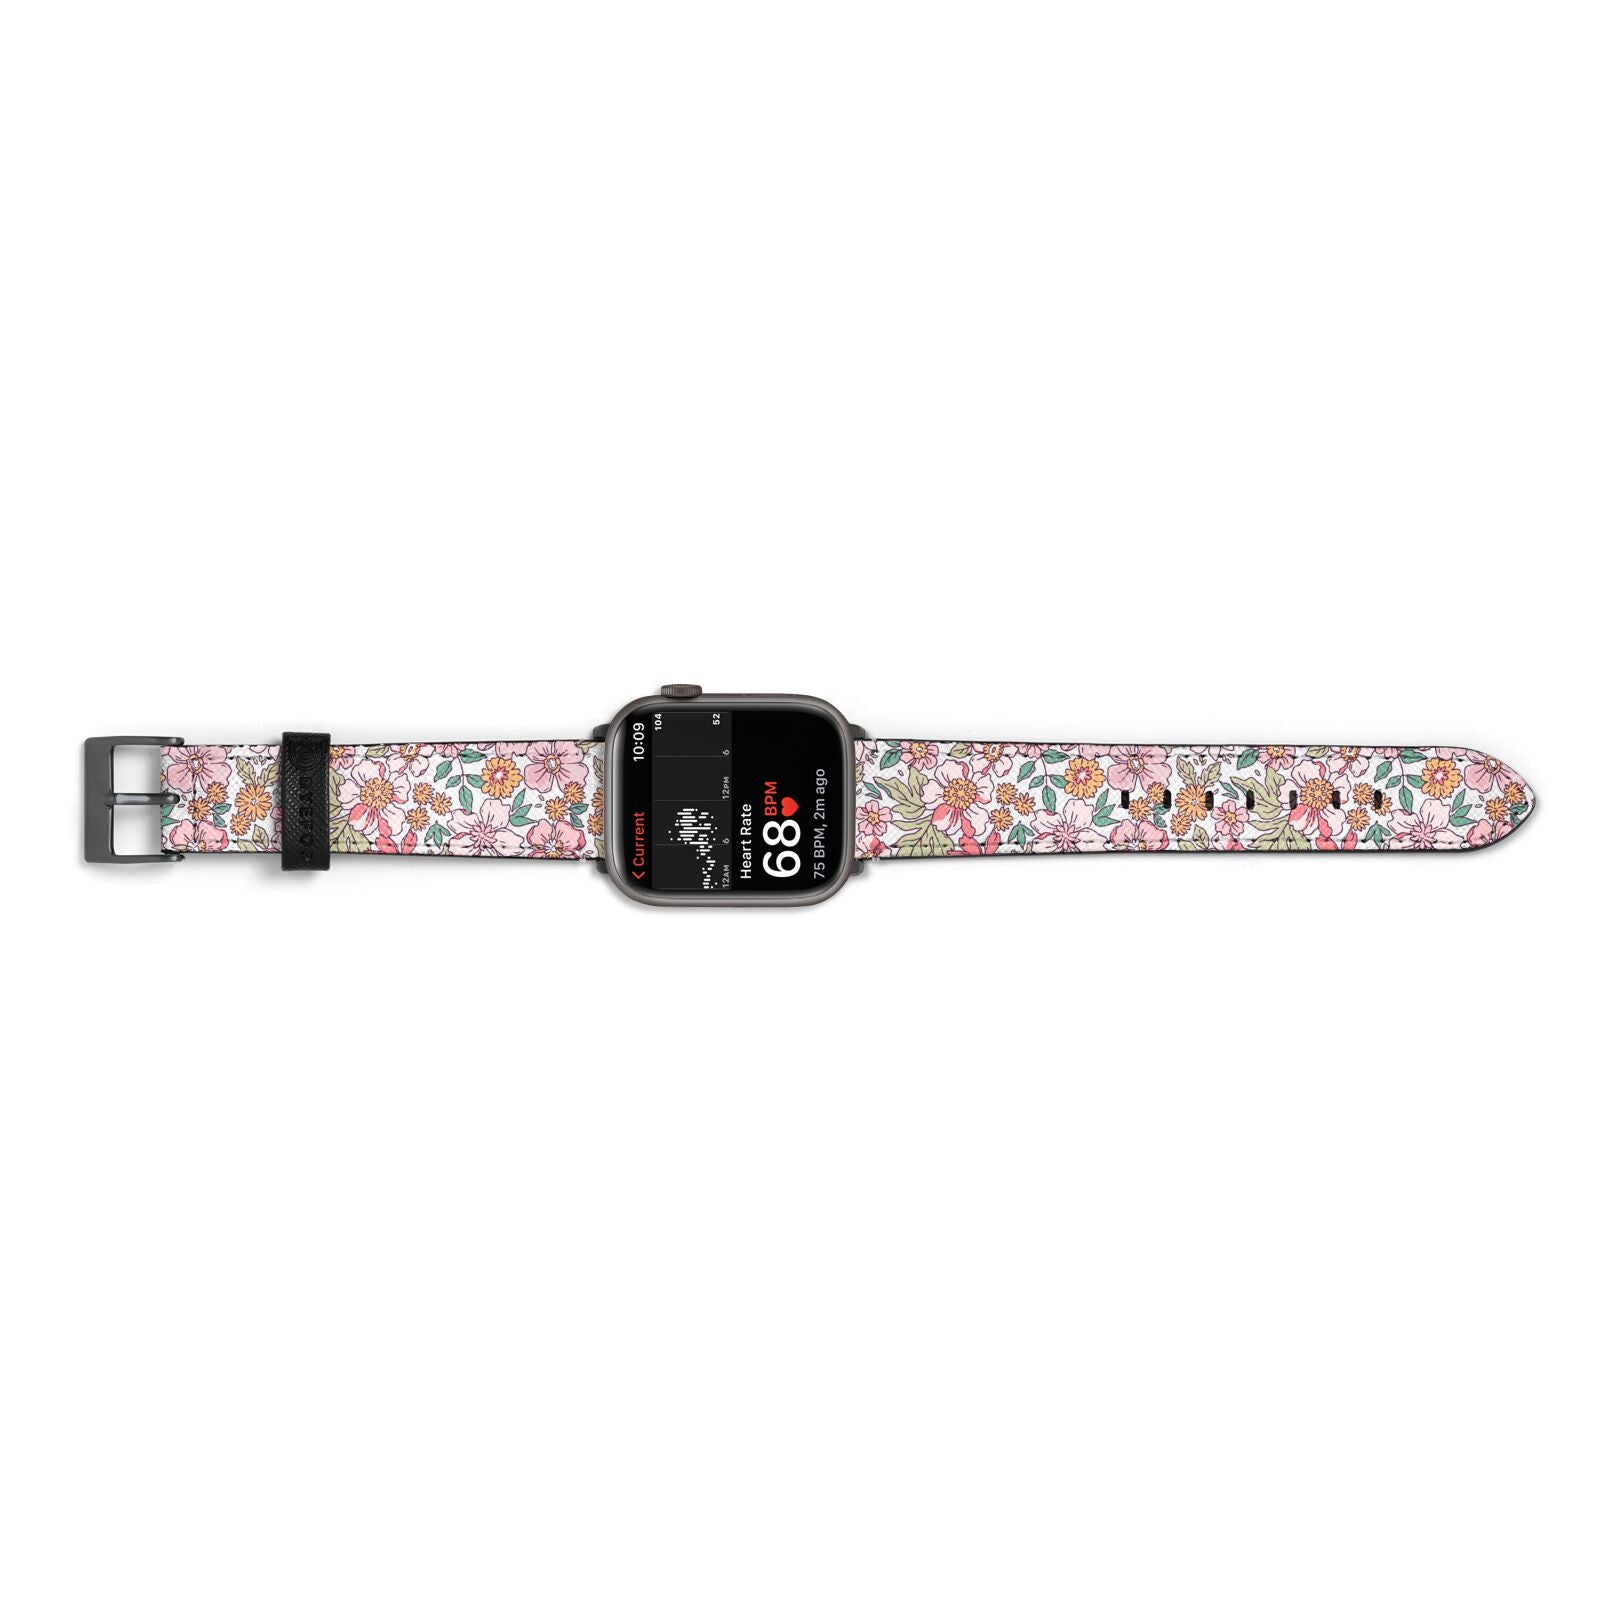 Small Floral Pattern Apple Watch Strap Size 38mm Landscape Image Space Grey Hardware